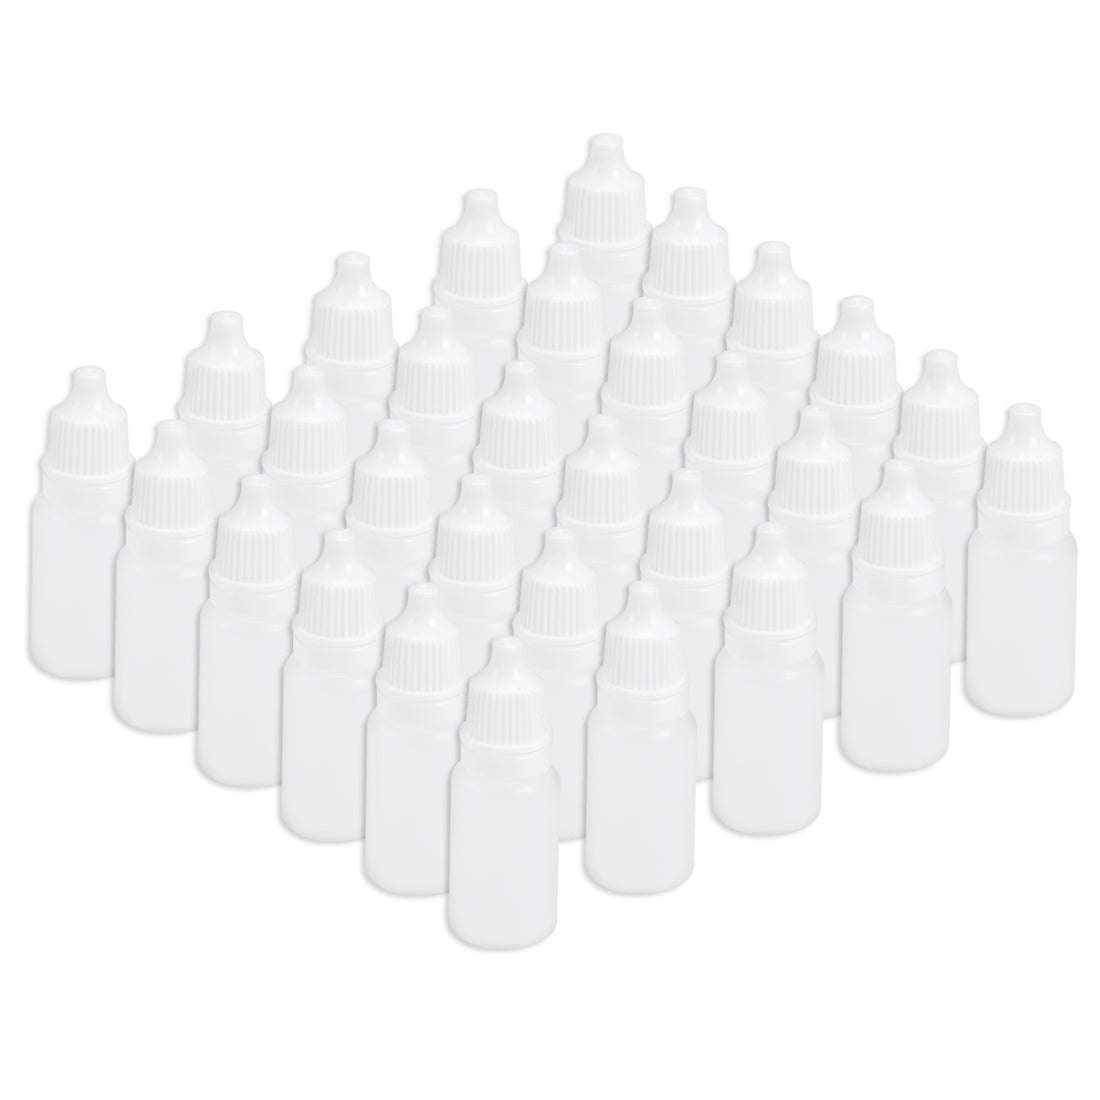 uxcell Uxcell 10ml/0.34 oz Empty Squeezable Dropper Bottle 30pcs